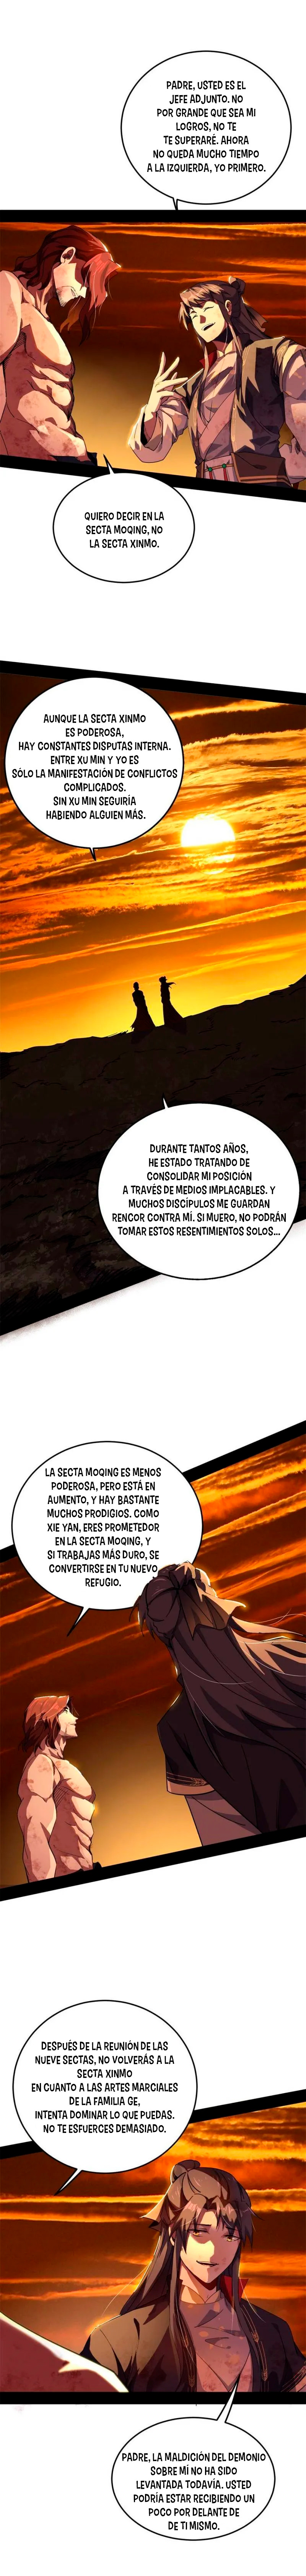 Manga Soy un dios maligno Chapter 311 image number 1